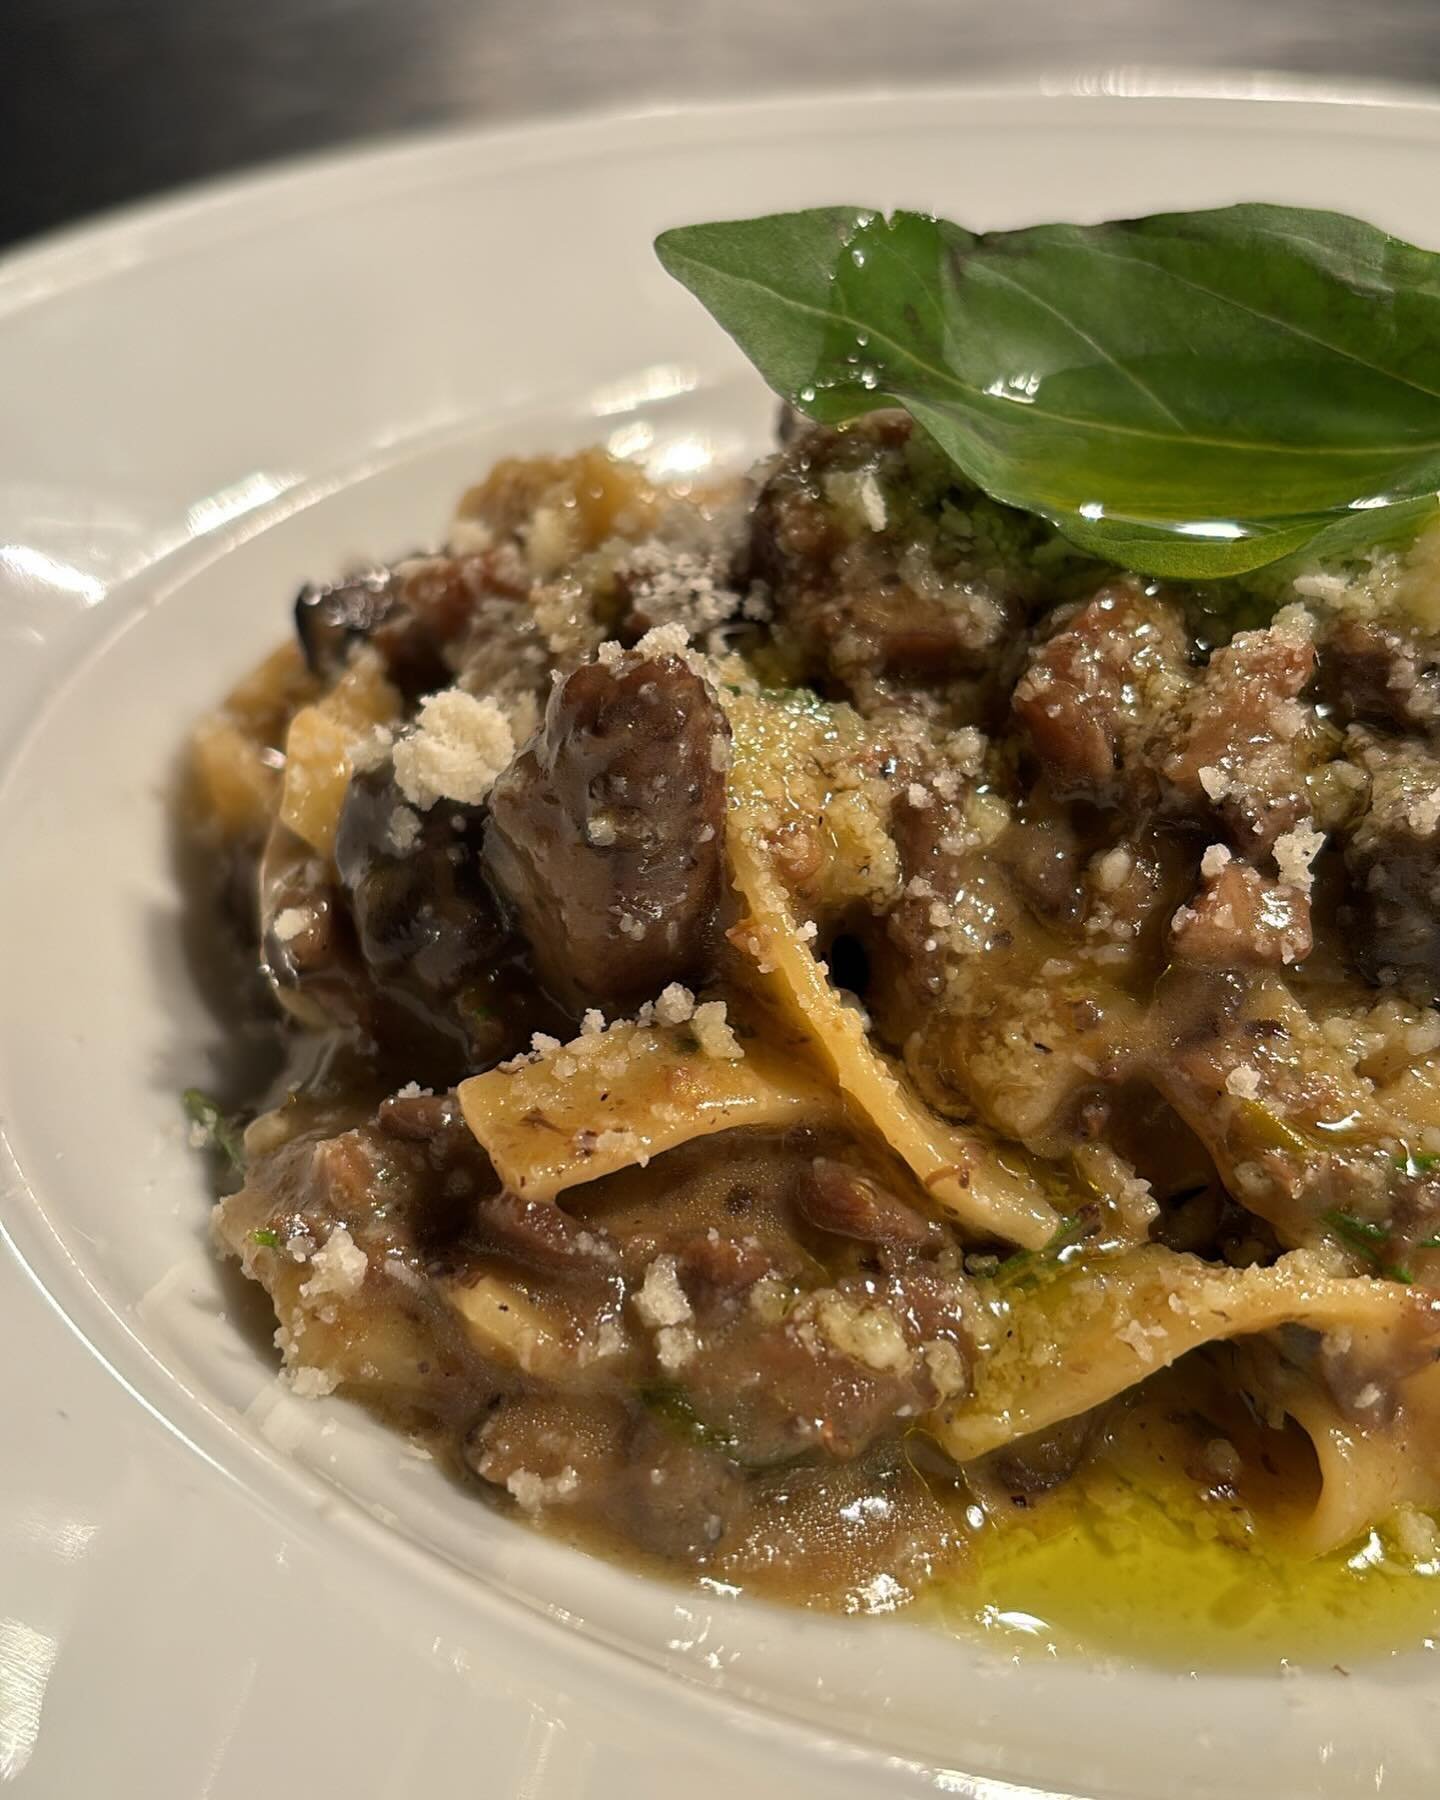 This weeks special. Rag&ugrave; di funghi. Mushroom rag&ugrave; with fresh tagliatelle. It&rsquo;s a dish from our head chef @izfran.co and it&rsquo;s quite amazing. Come get it as soon as possible !